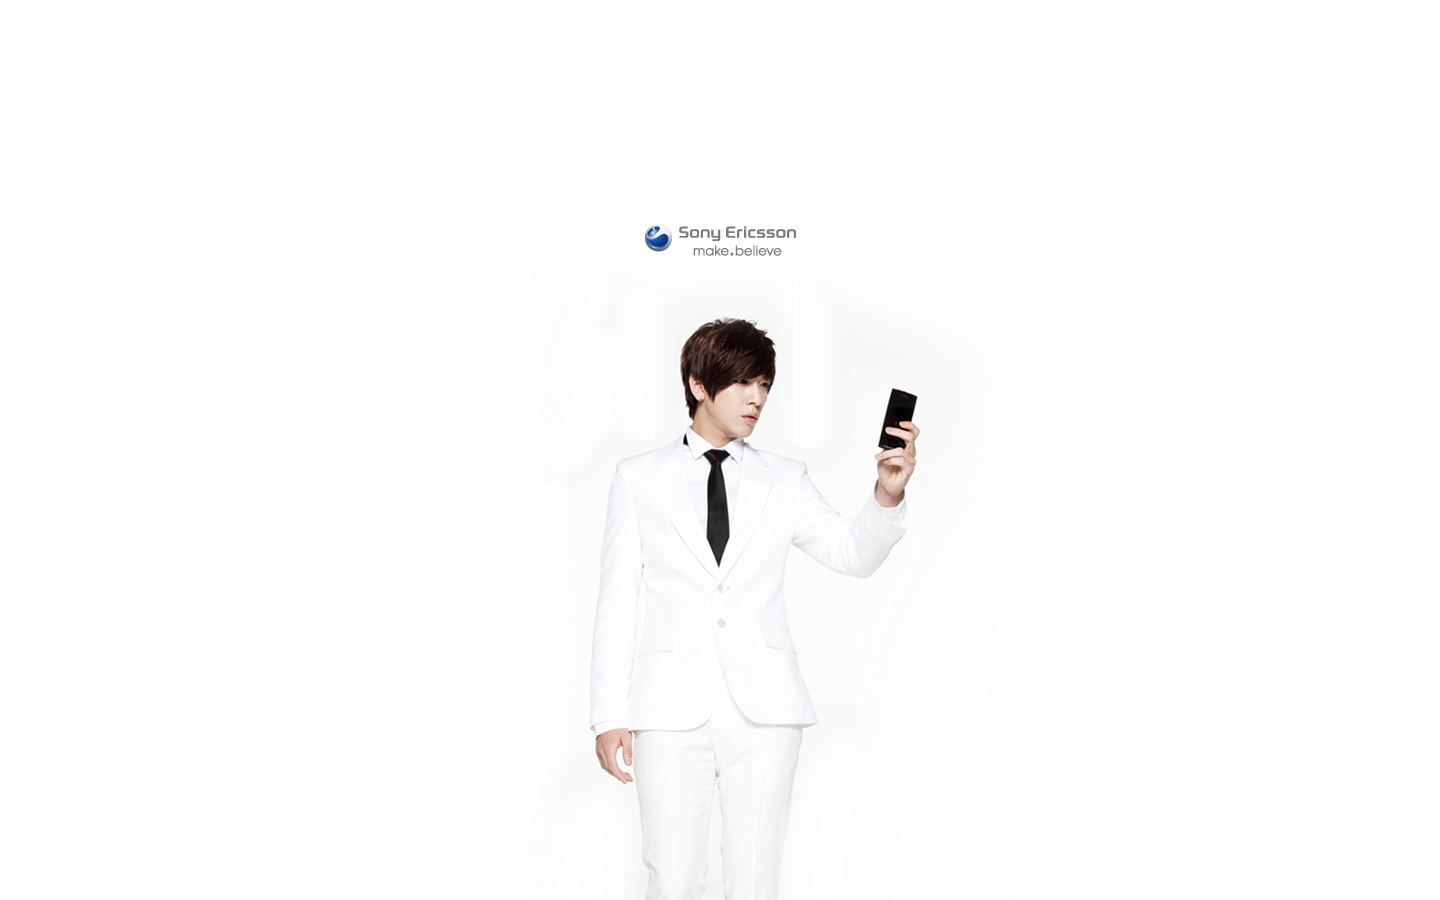 http://media.onsugar.com/files/2010/06/24/0/346/3463885/a56ce9475afd1315_cnblue_sony_ad_13.png